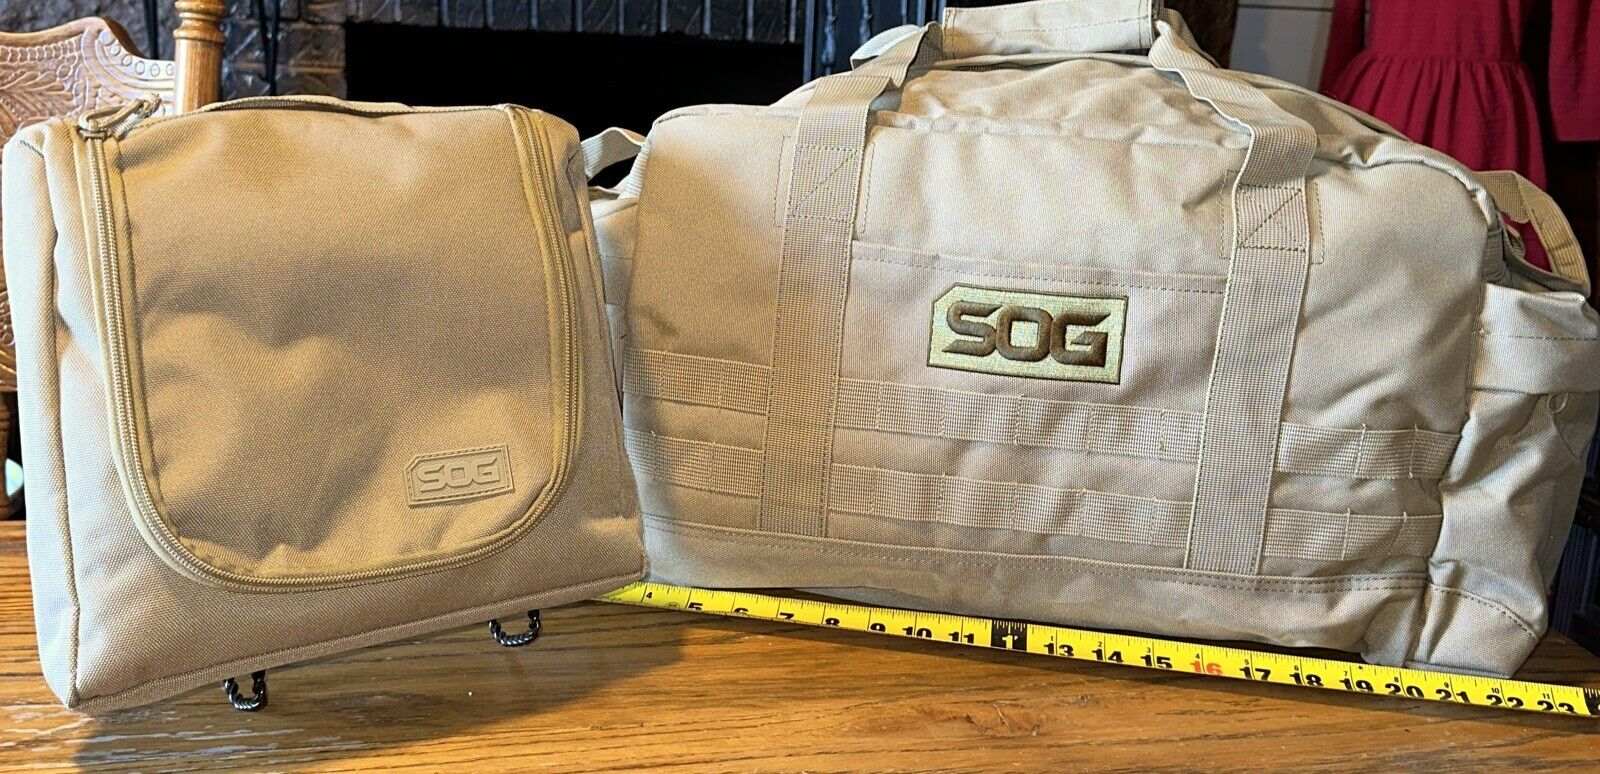 SOG Military Style Duffle Tactical Bag Field Range Pack Gear NWOT Large 2 Pieces